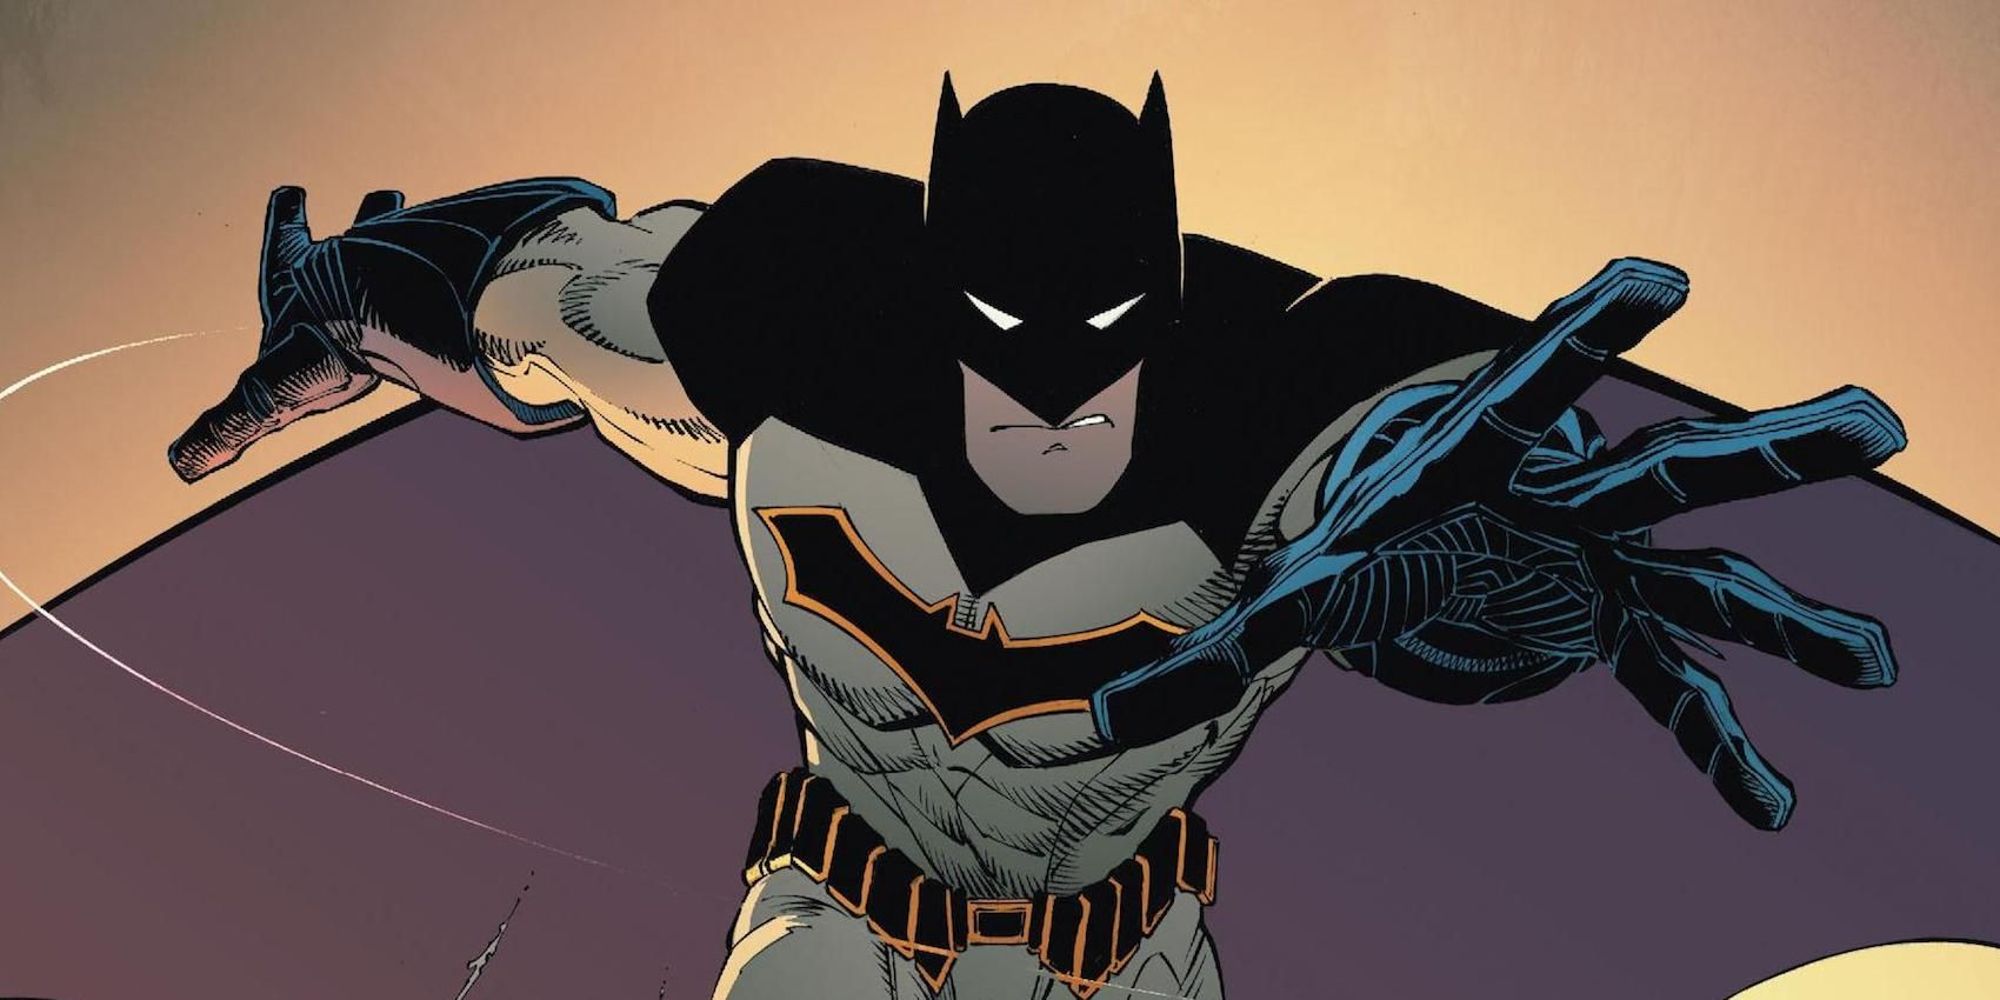 Rebirth Batman leaping into action in DC comics